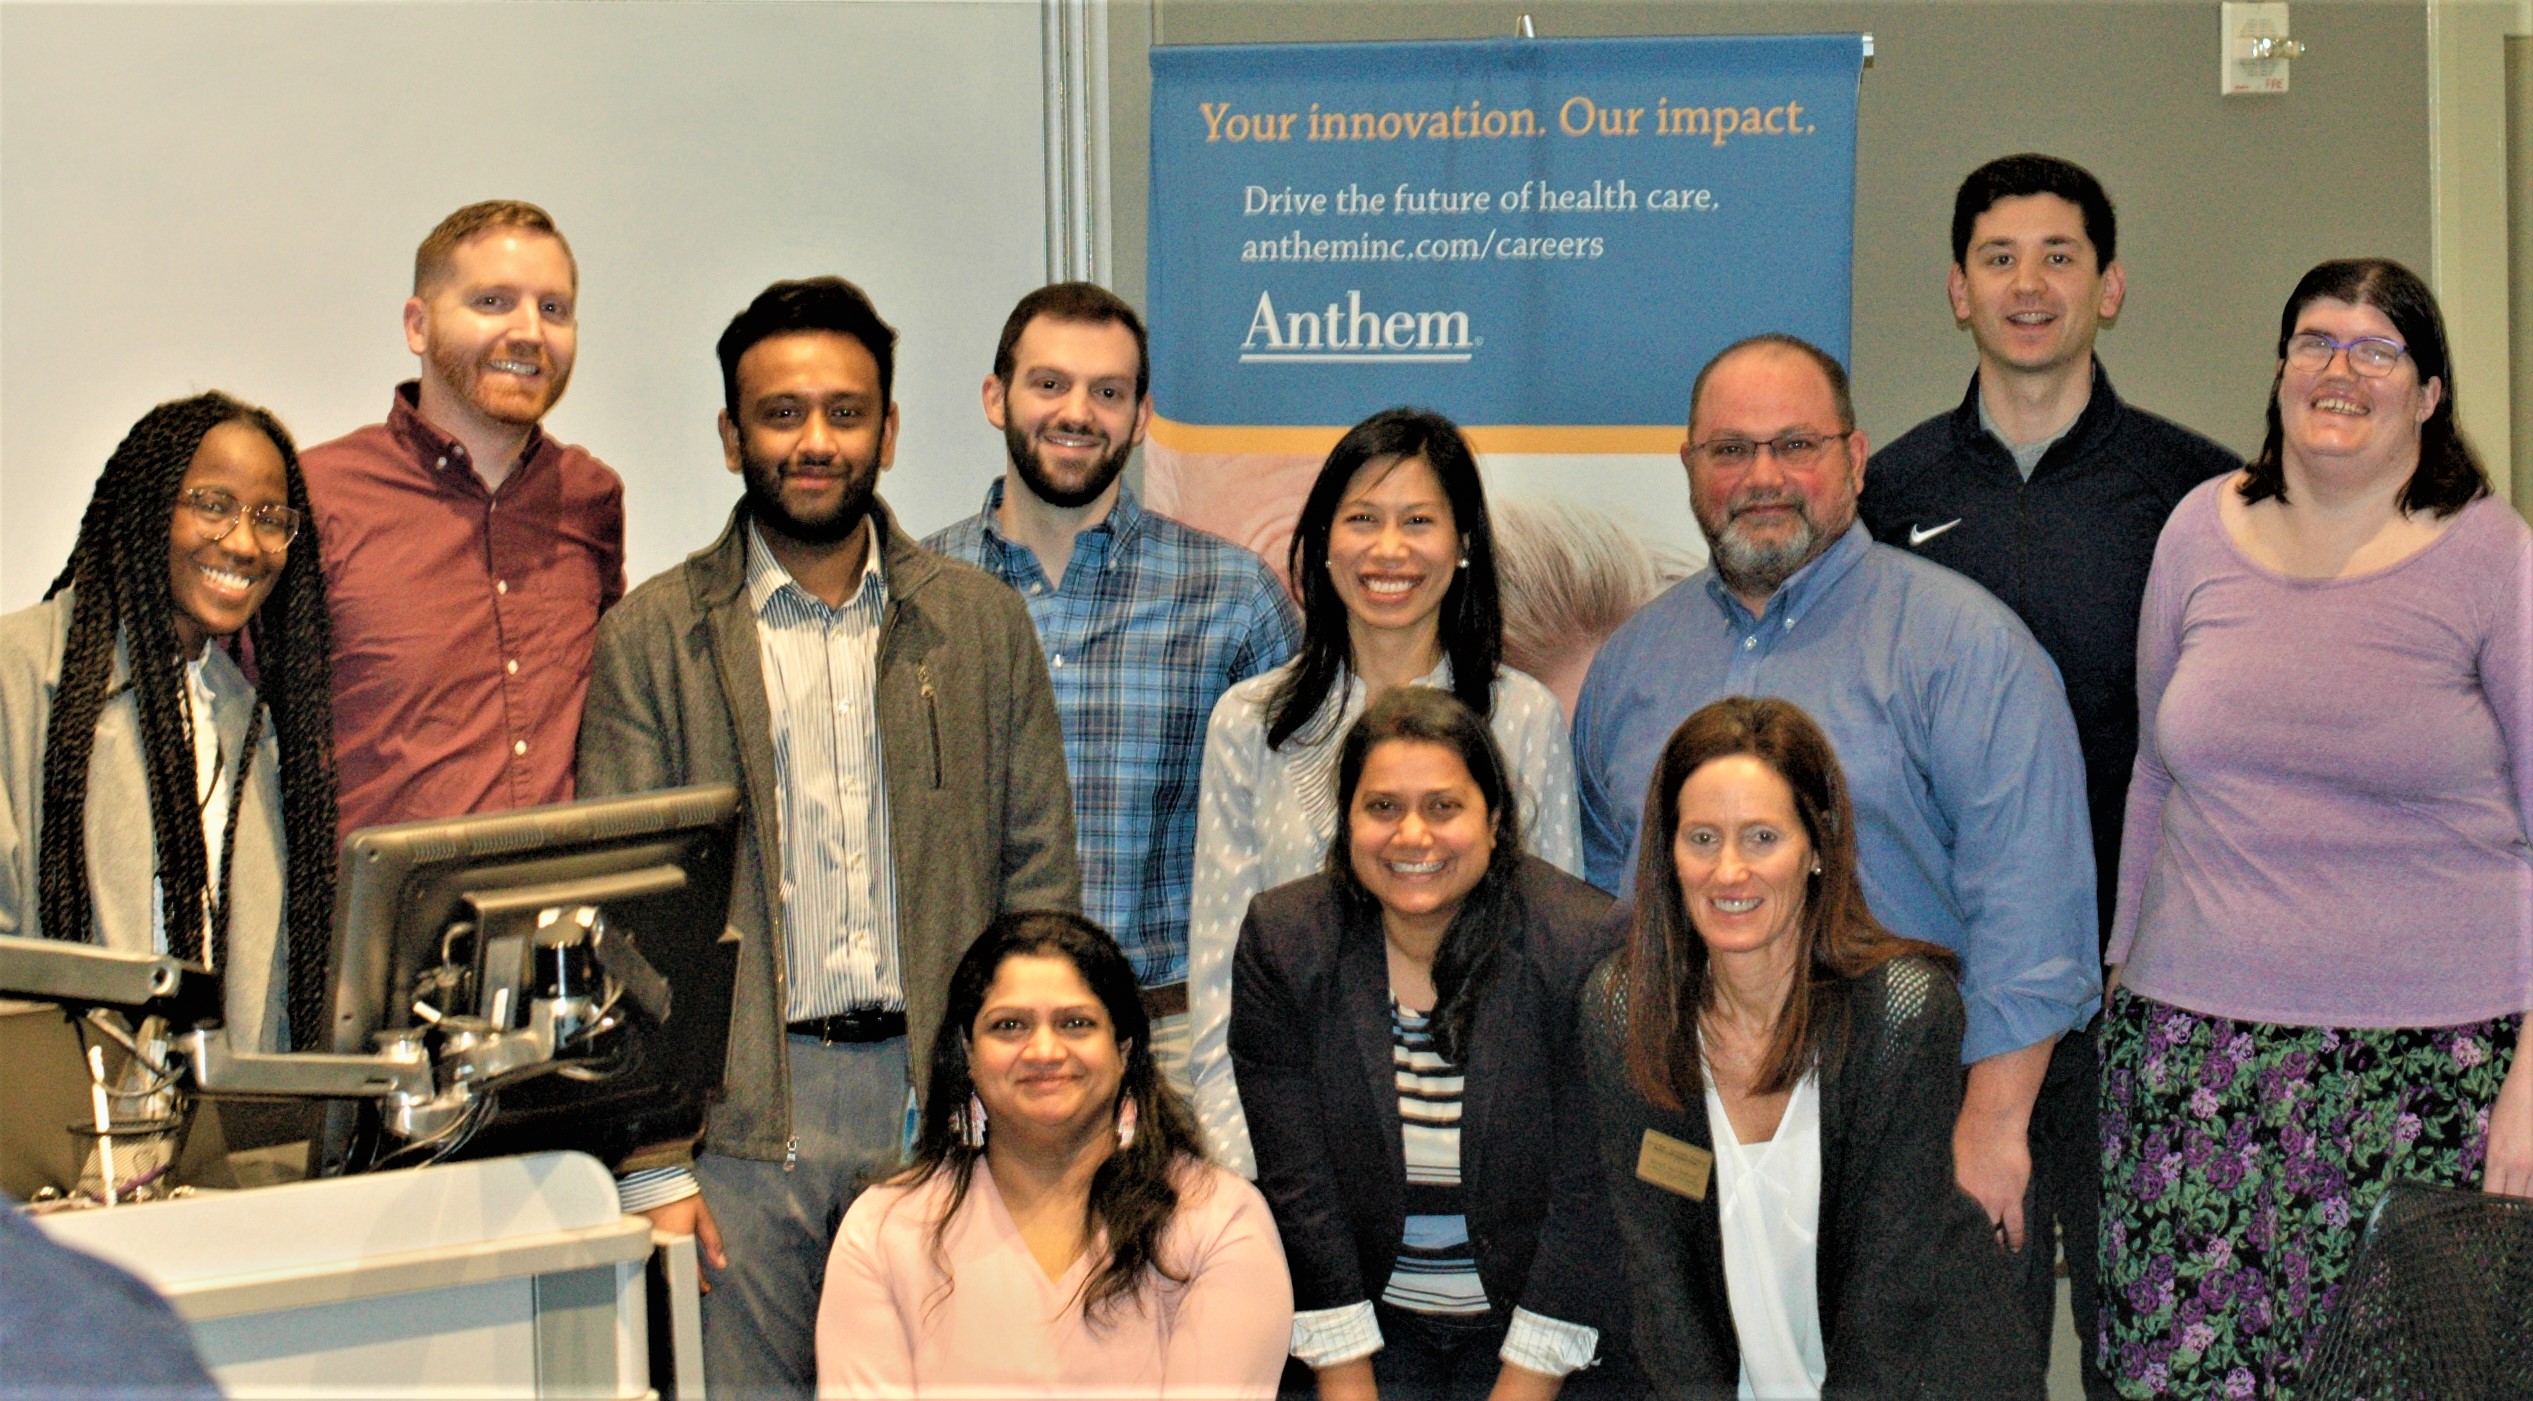 Officers from the Business Analytics Club teamed up with the Business Analytics Center and Anthem professionals to present a real-world look at analytics in healthcare.